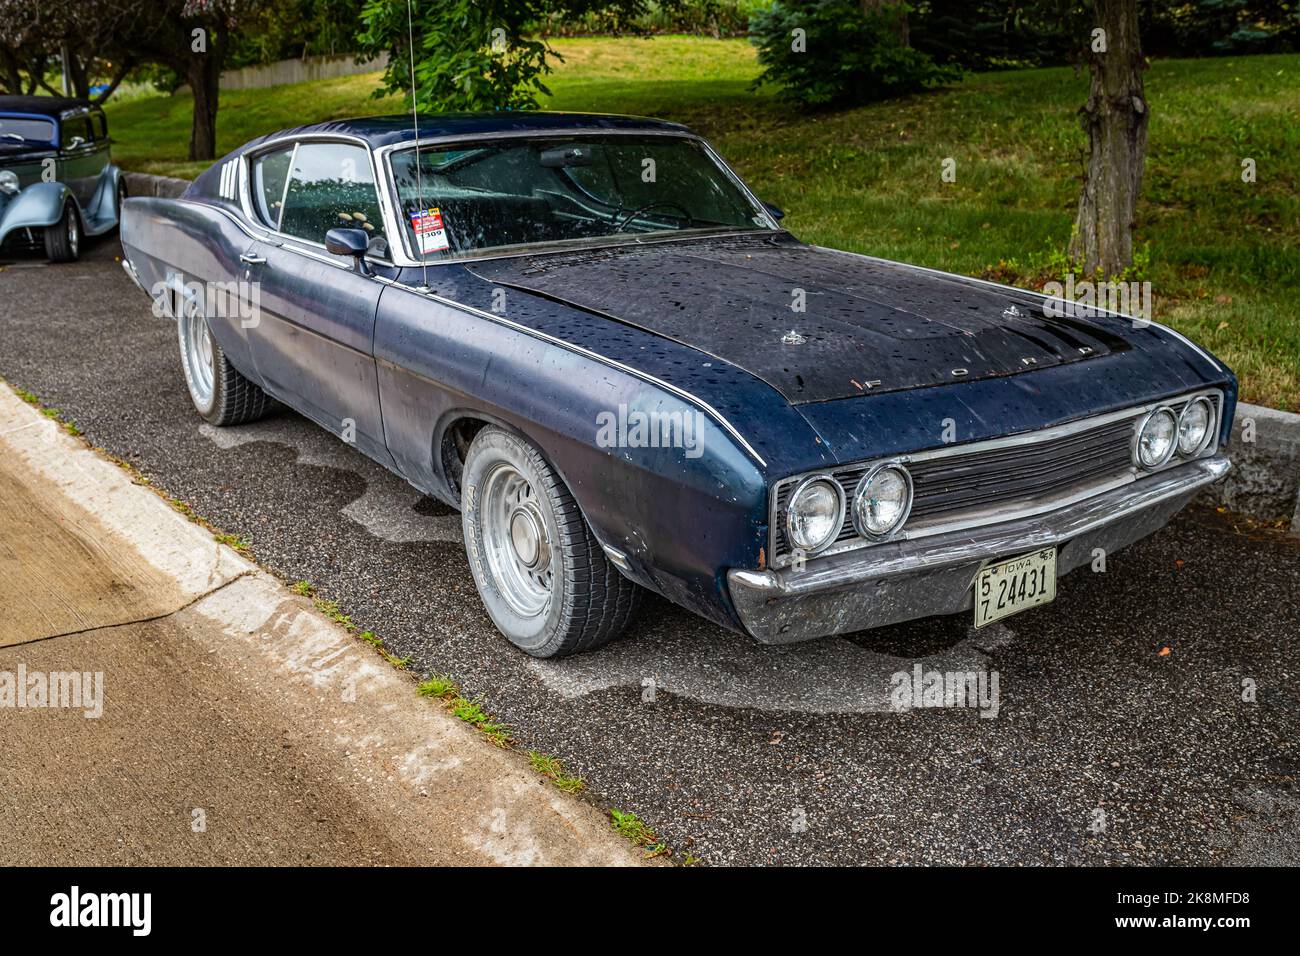 Des Moines, IA - July 01, 2022: High perspective front corner view of a 1969 Ford Torino Talladega 428 Coupe at a local car show. Stock Photo